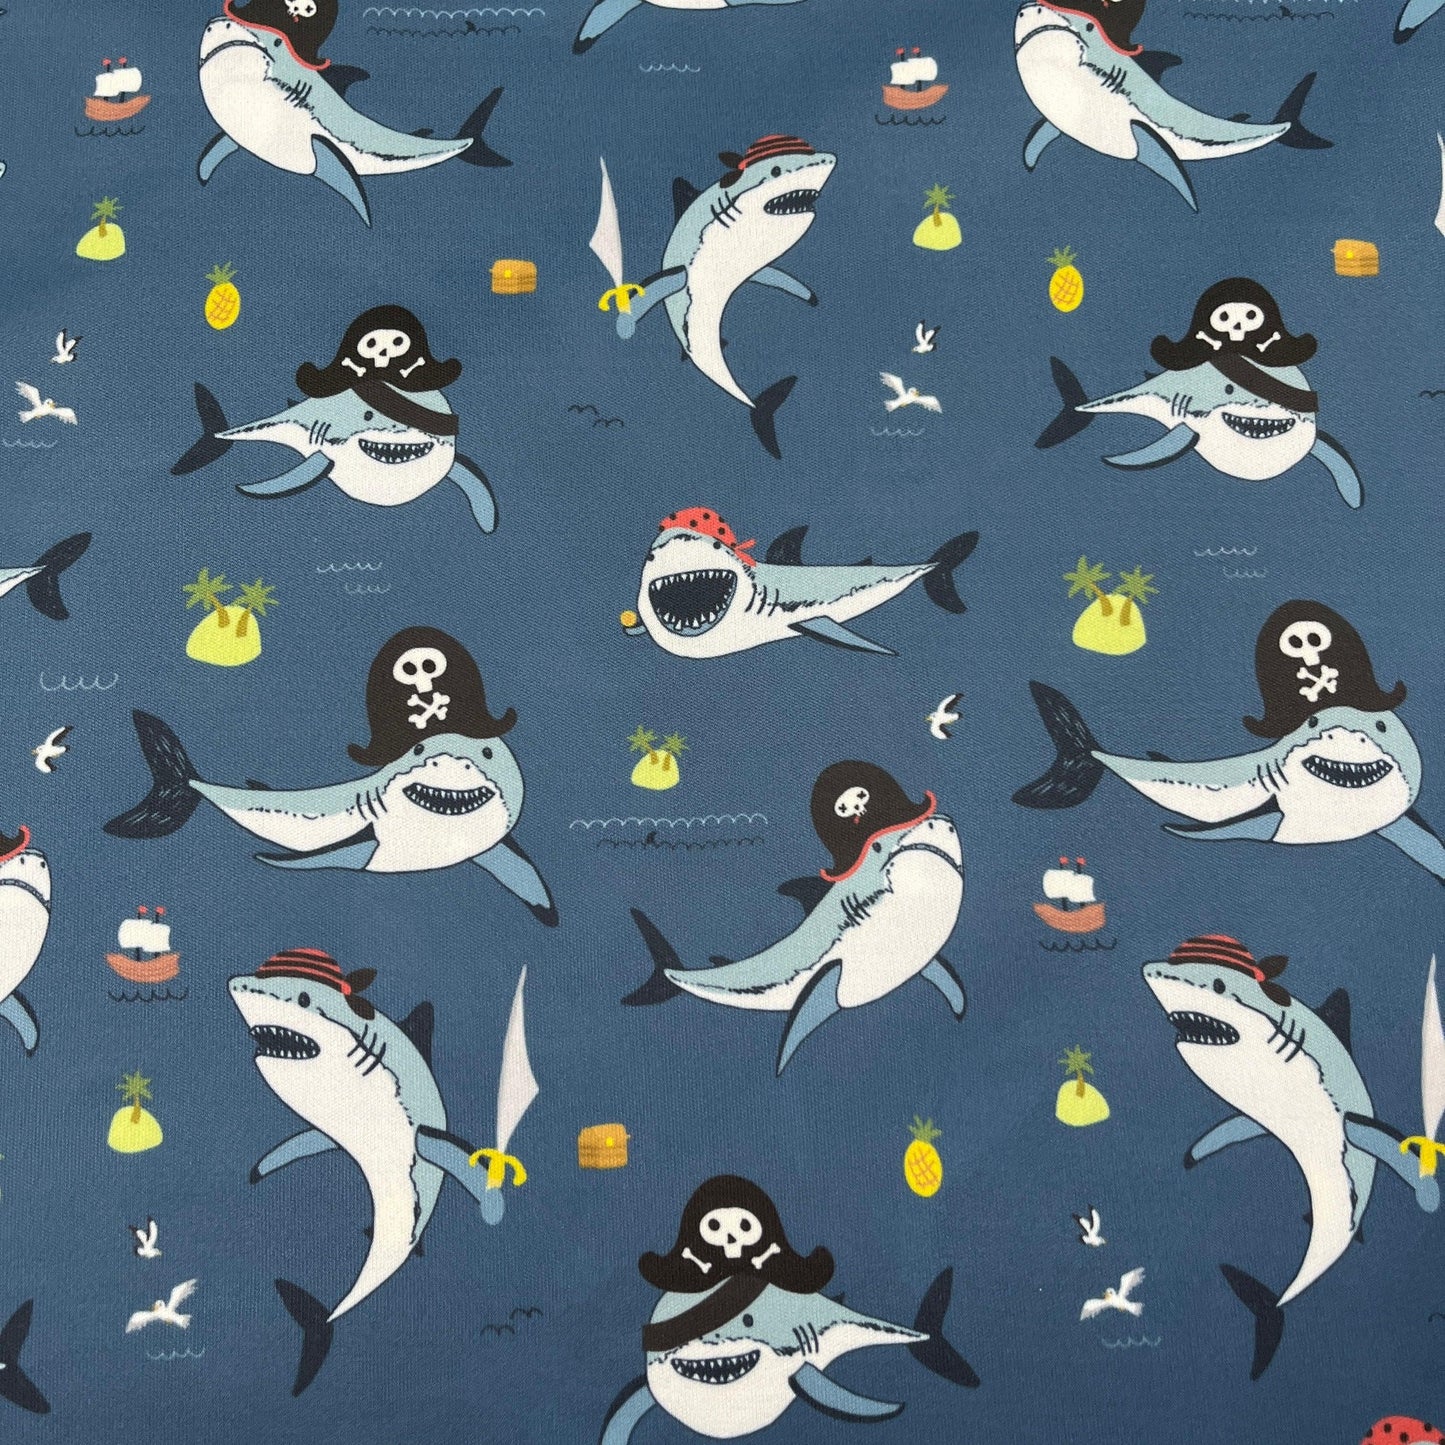 Shark Pirates 1 mil PUL Fabric - Made in the USA - Nature's Fabrics